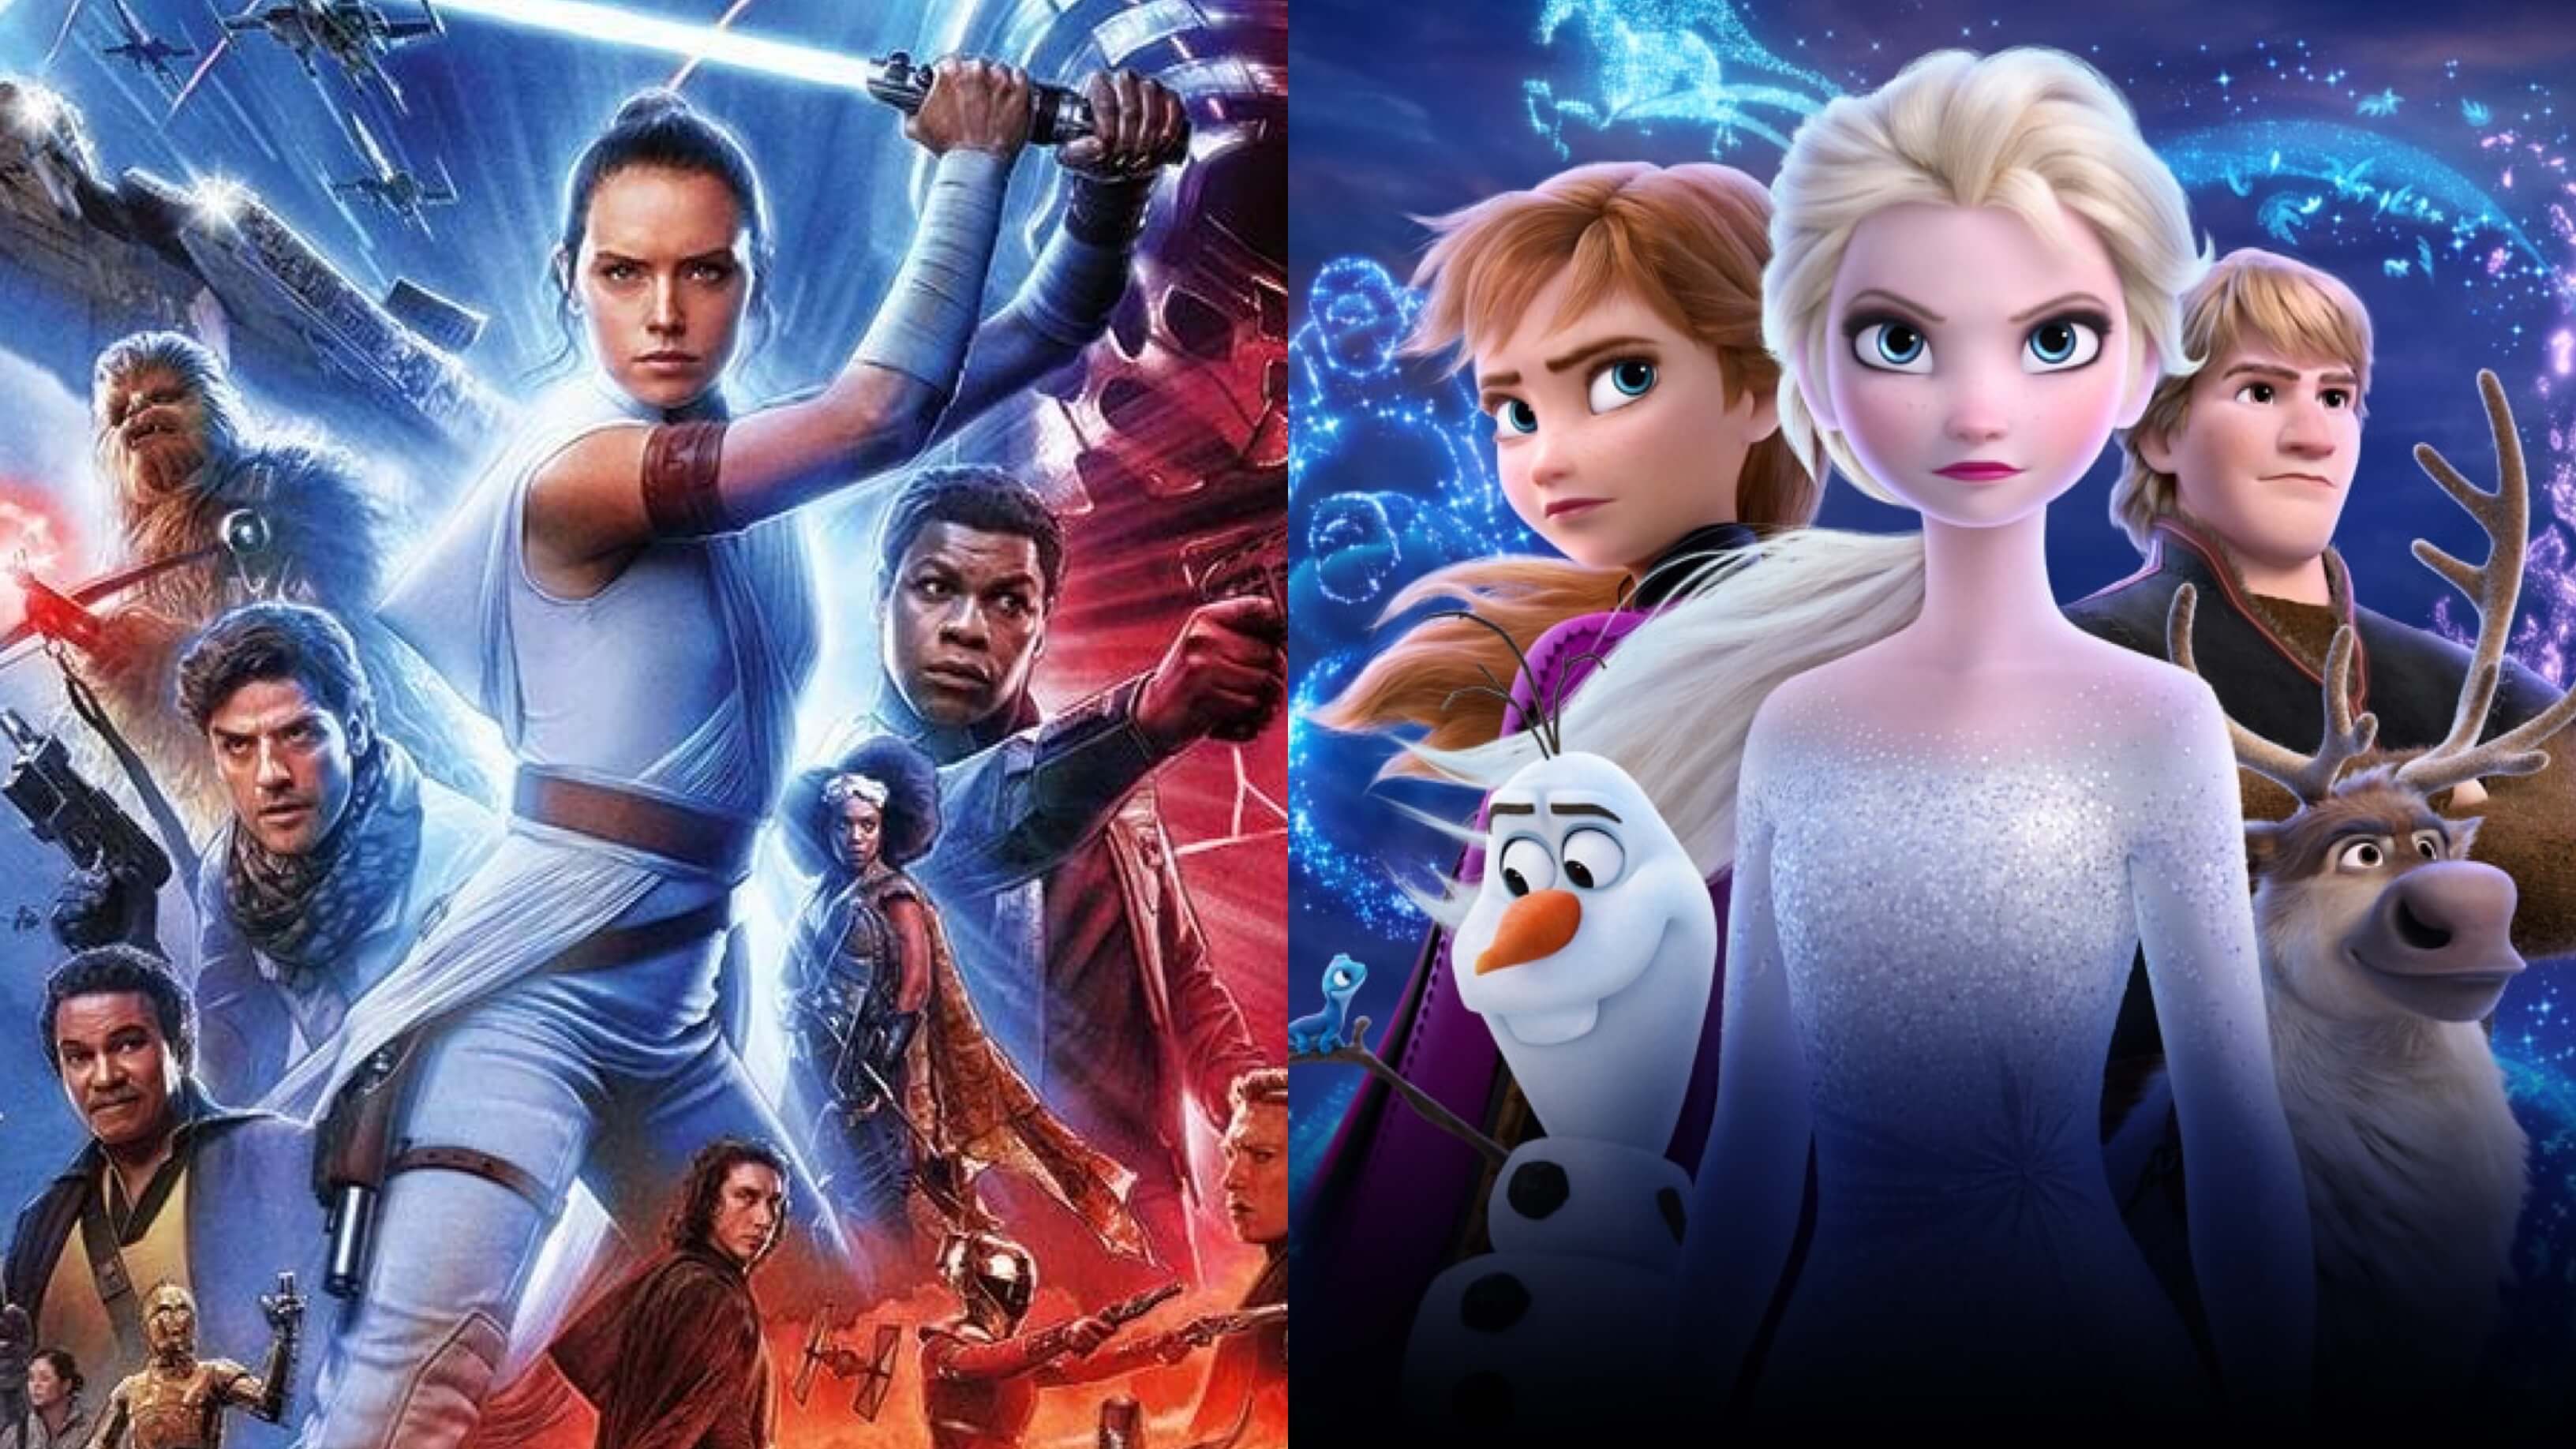 ‘The Rise of Skywalker’ and ‘Frozen 2’ Still Dominating The Holiday Season Box Office